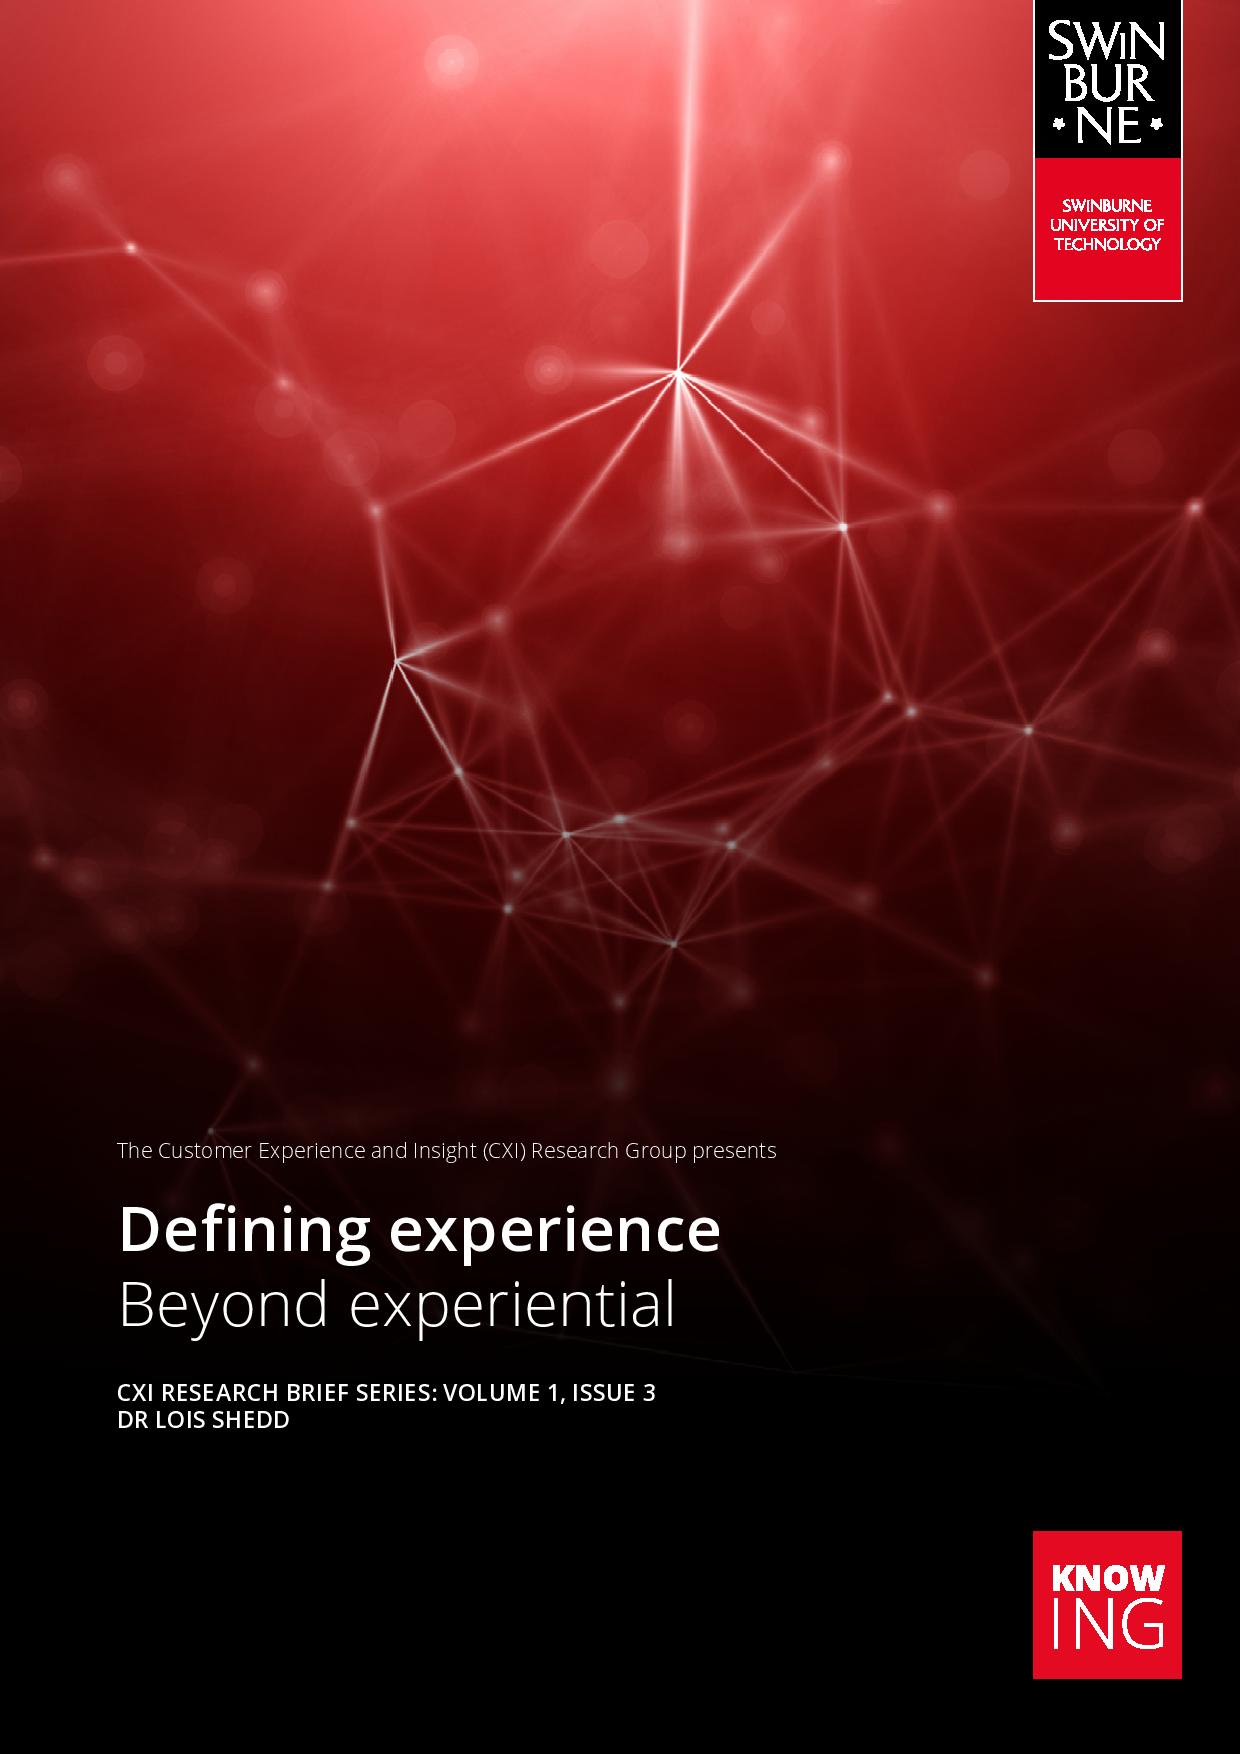 Defining experience: Beyond experiential